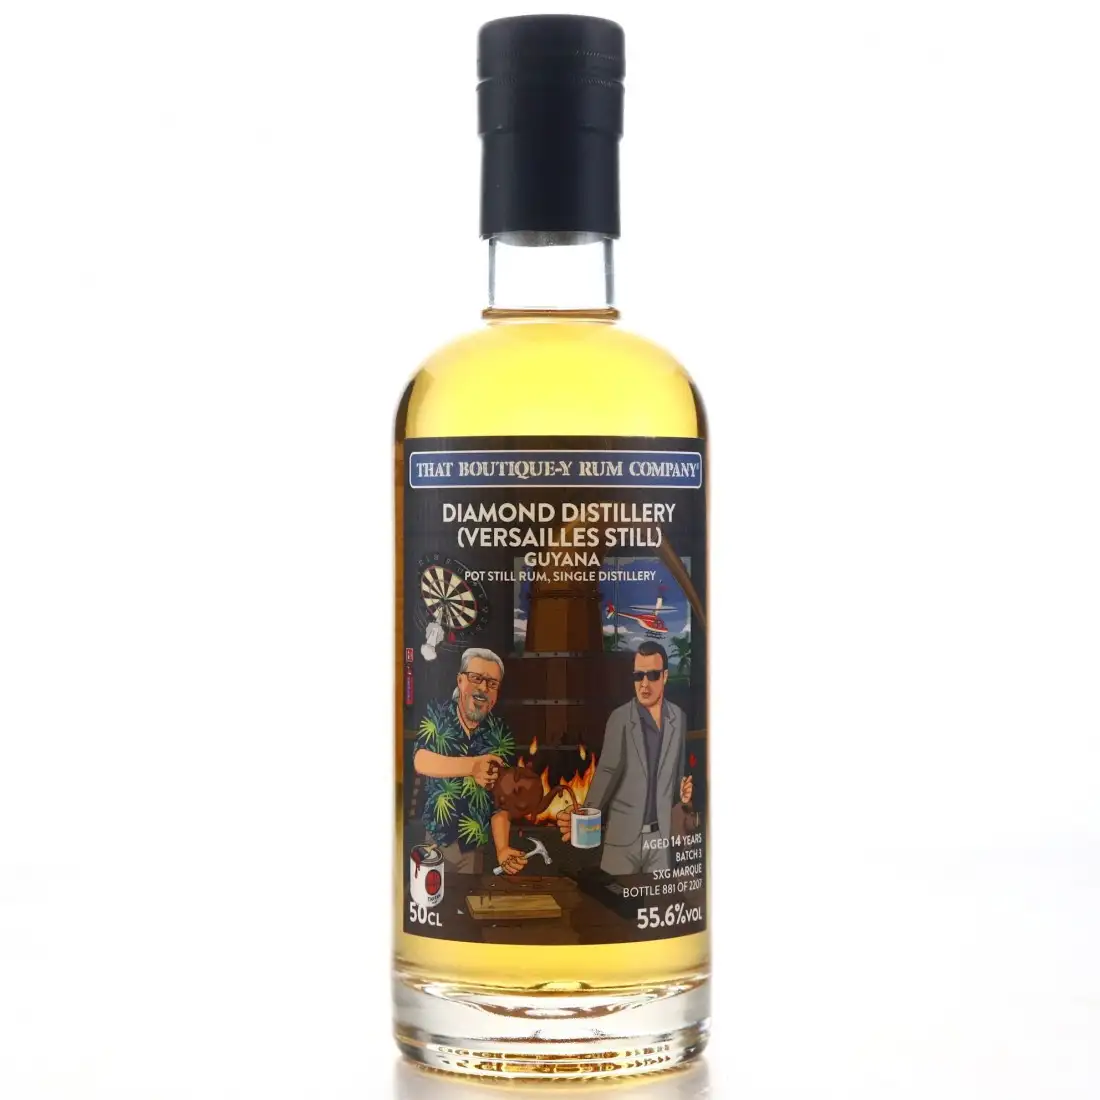 Image of the front of the bottle of the rum Versailles Still SXG